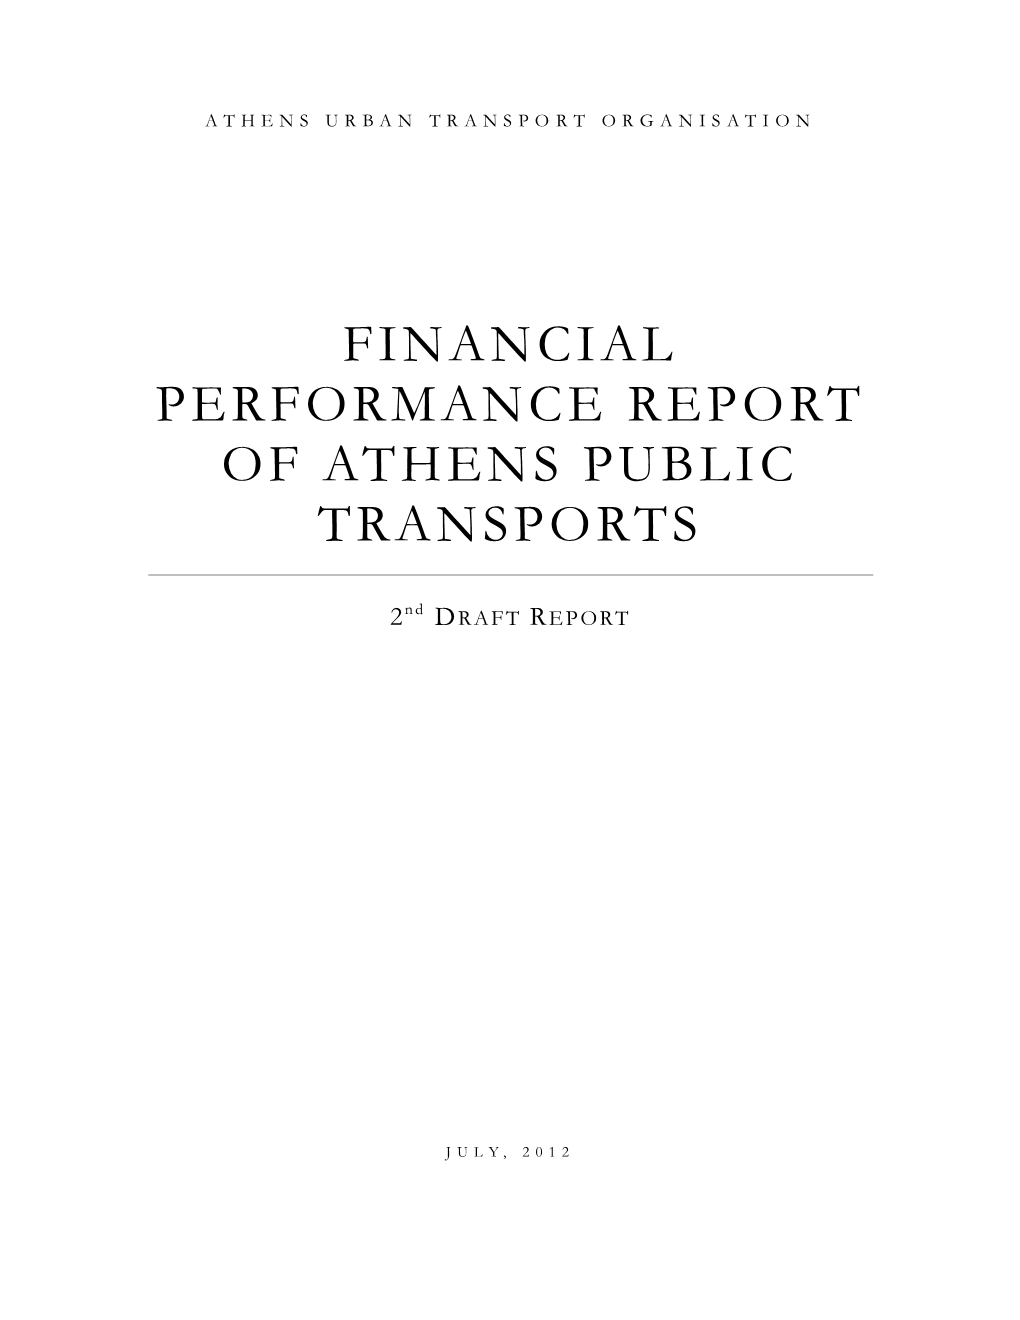 Financial Performance Report of Athens Public Transports